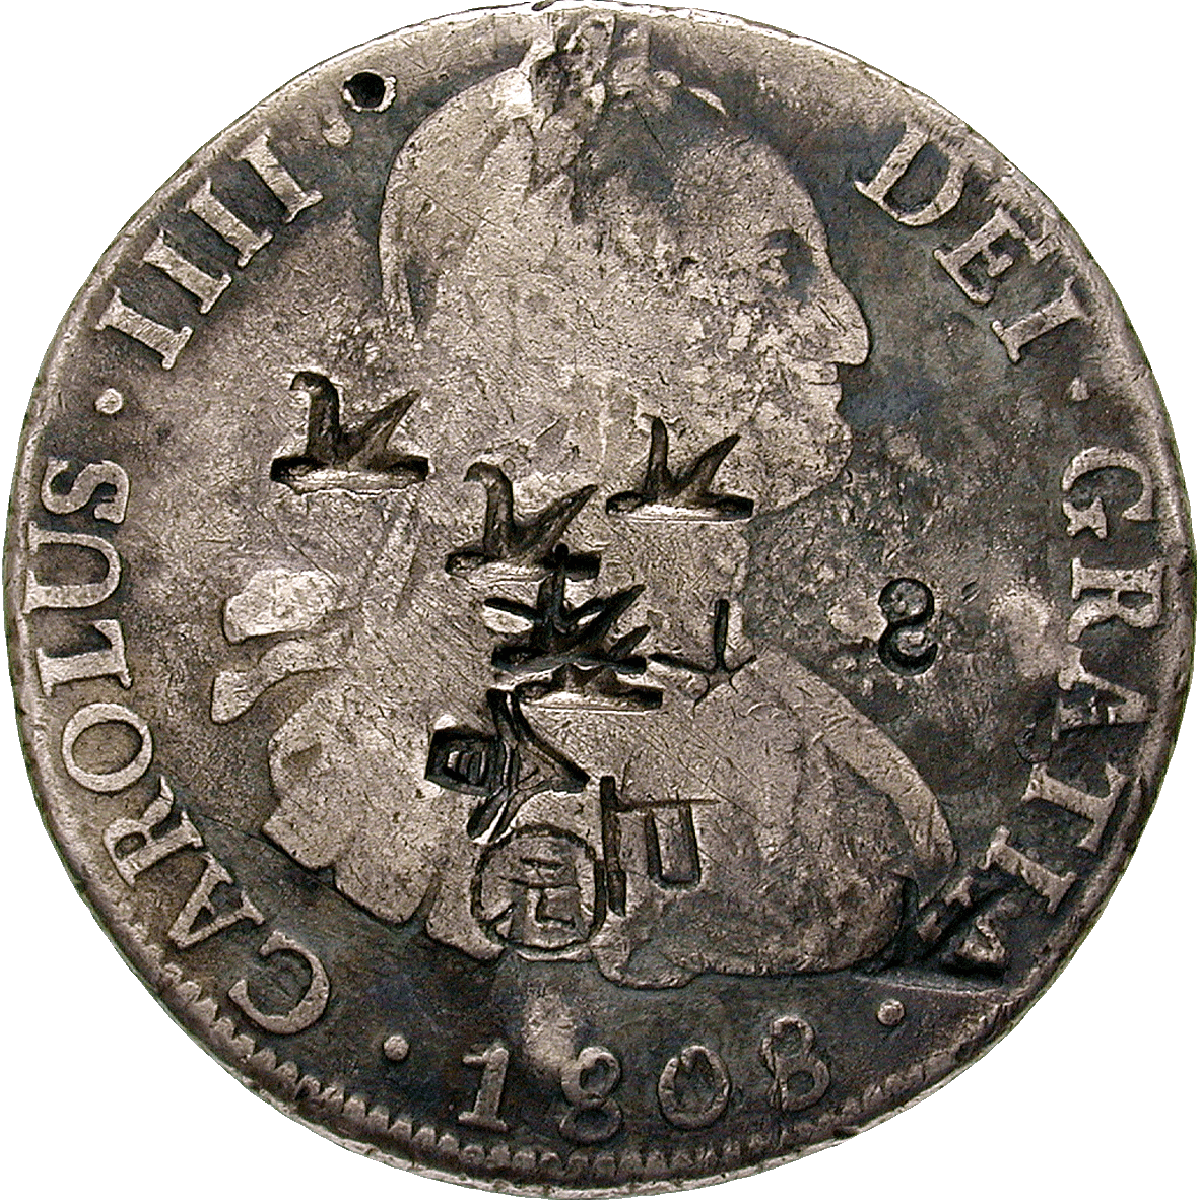 Spanish silver coin minted in Bolivia with chop marks from 12 different Qing Dynasty merchant silver inspectors, validating its weight, authenticity, and silver content (early 19th century)